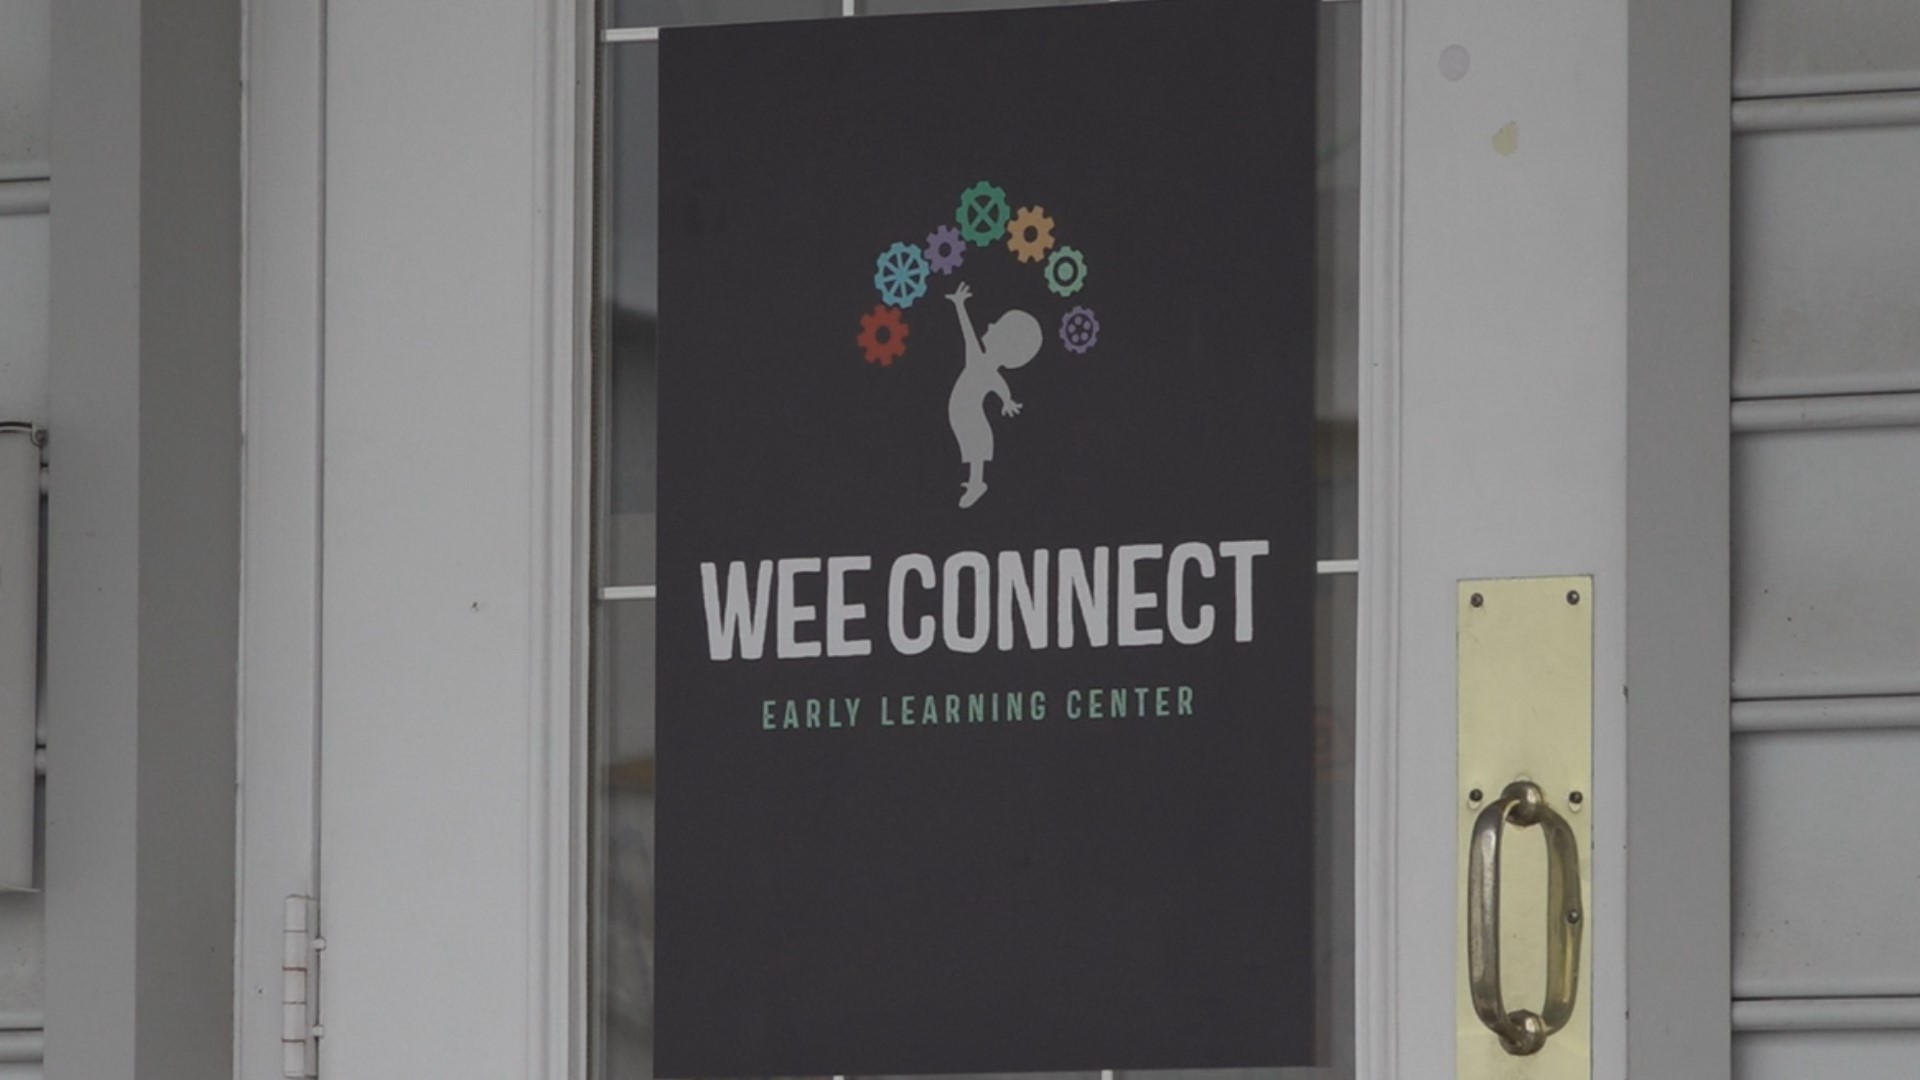 WeeConnect is a first-of-its-kind early childhood learning center.